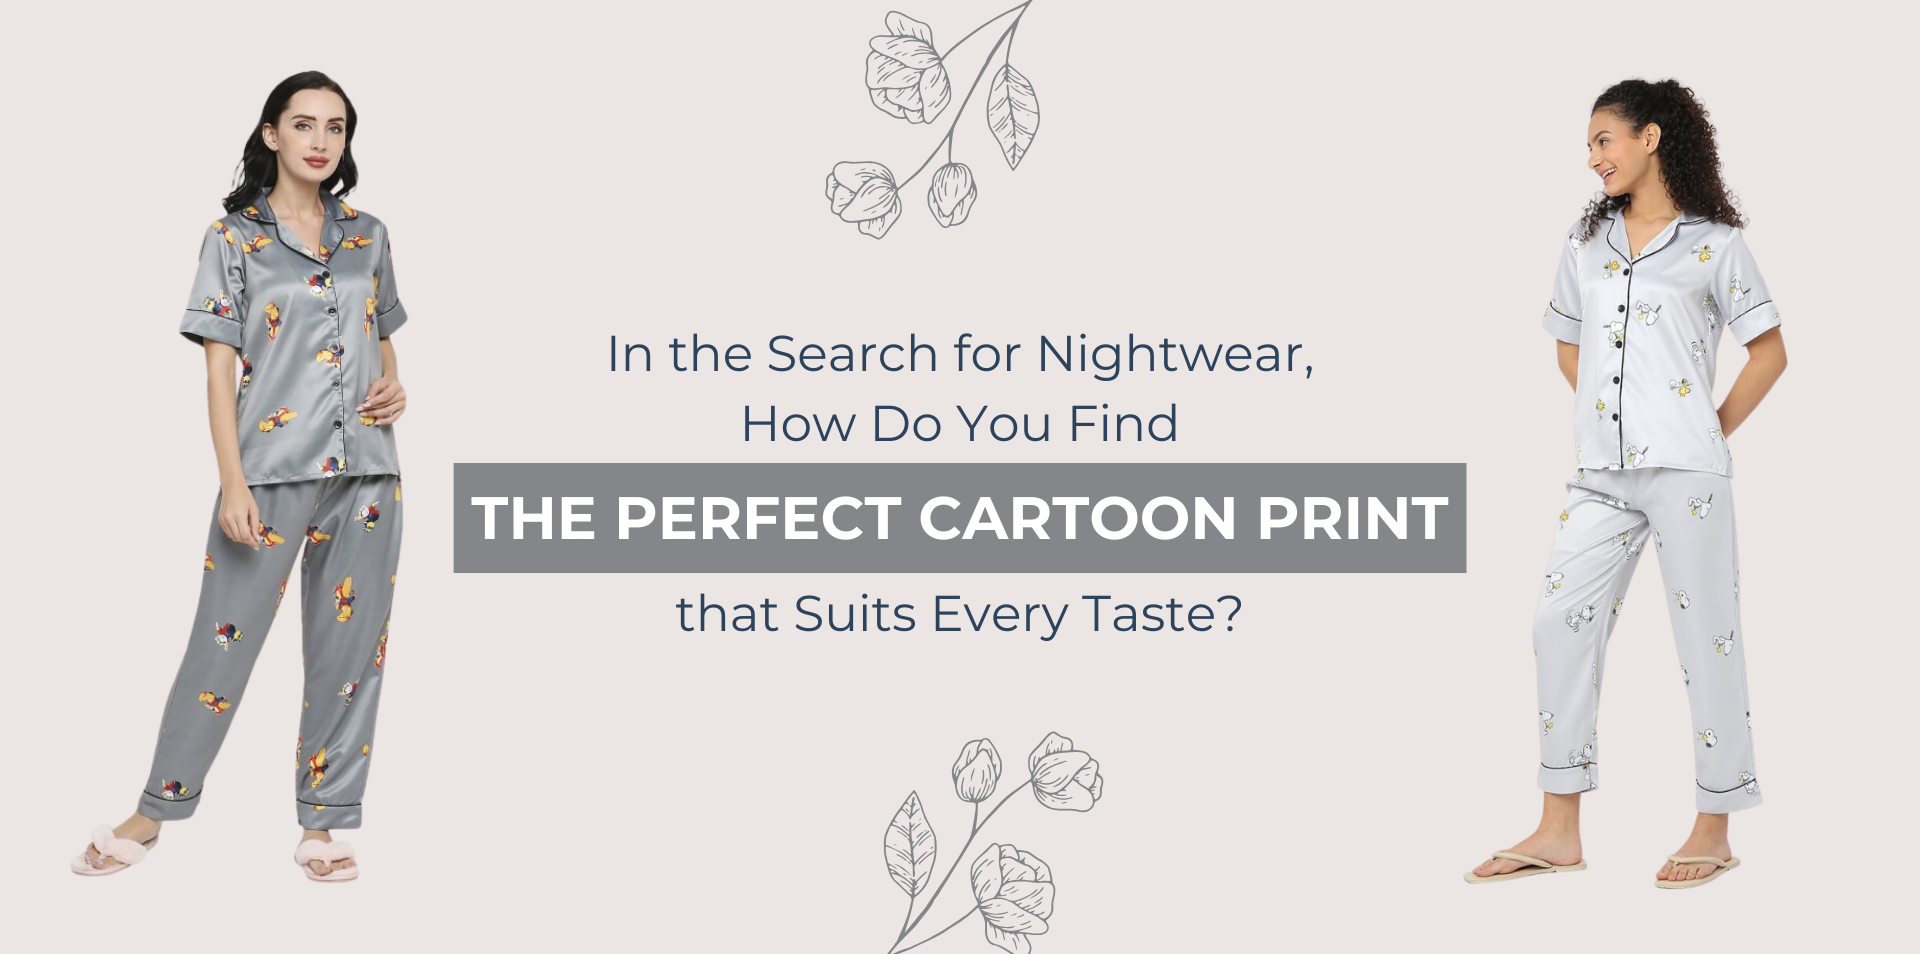 In the Search for Nightwear, How Do You Find the Perfect Cartoon Print that Suits Every Taste?